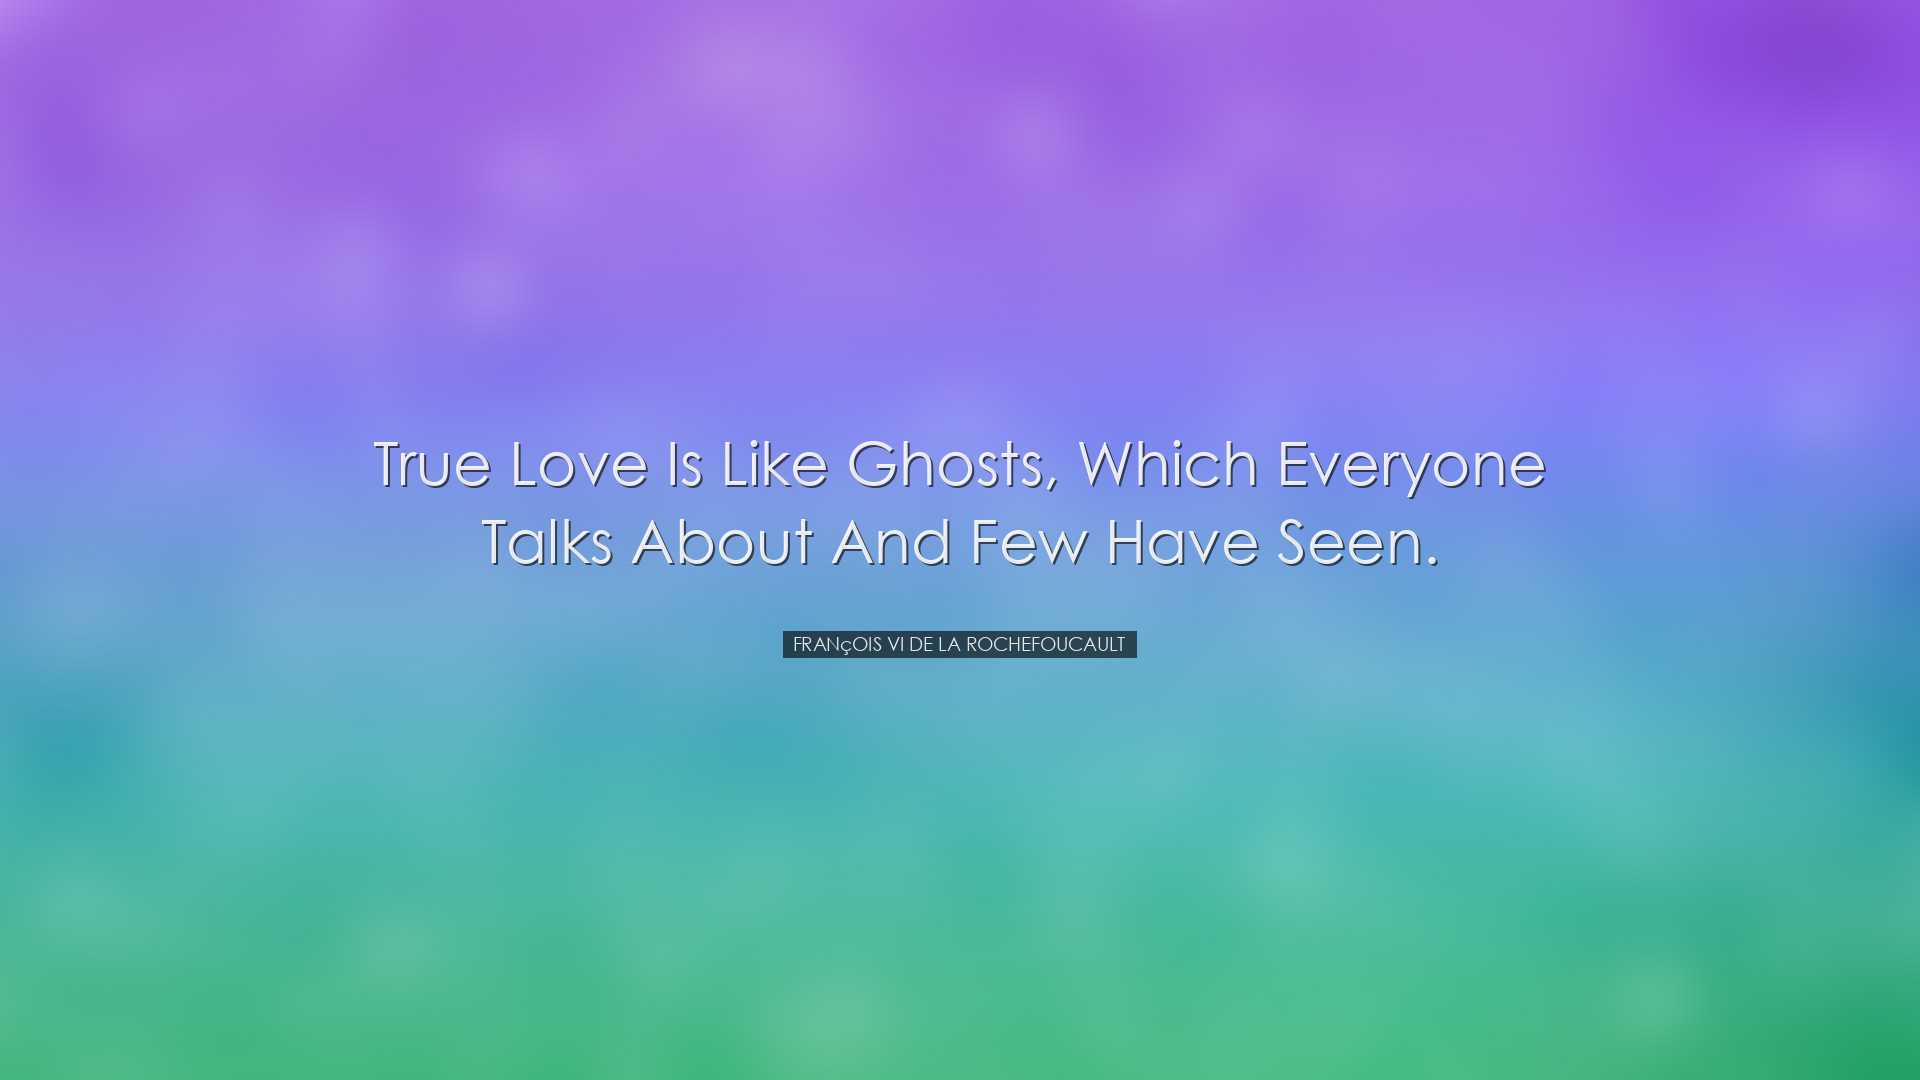 True love is like ghosts, which everyone talks about and few have